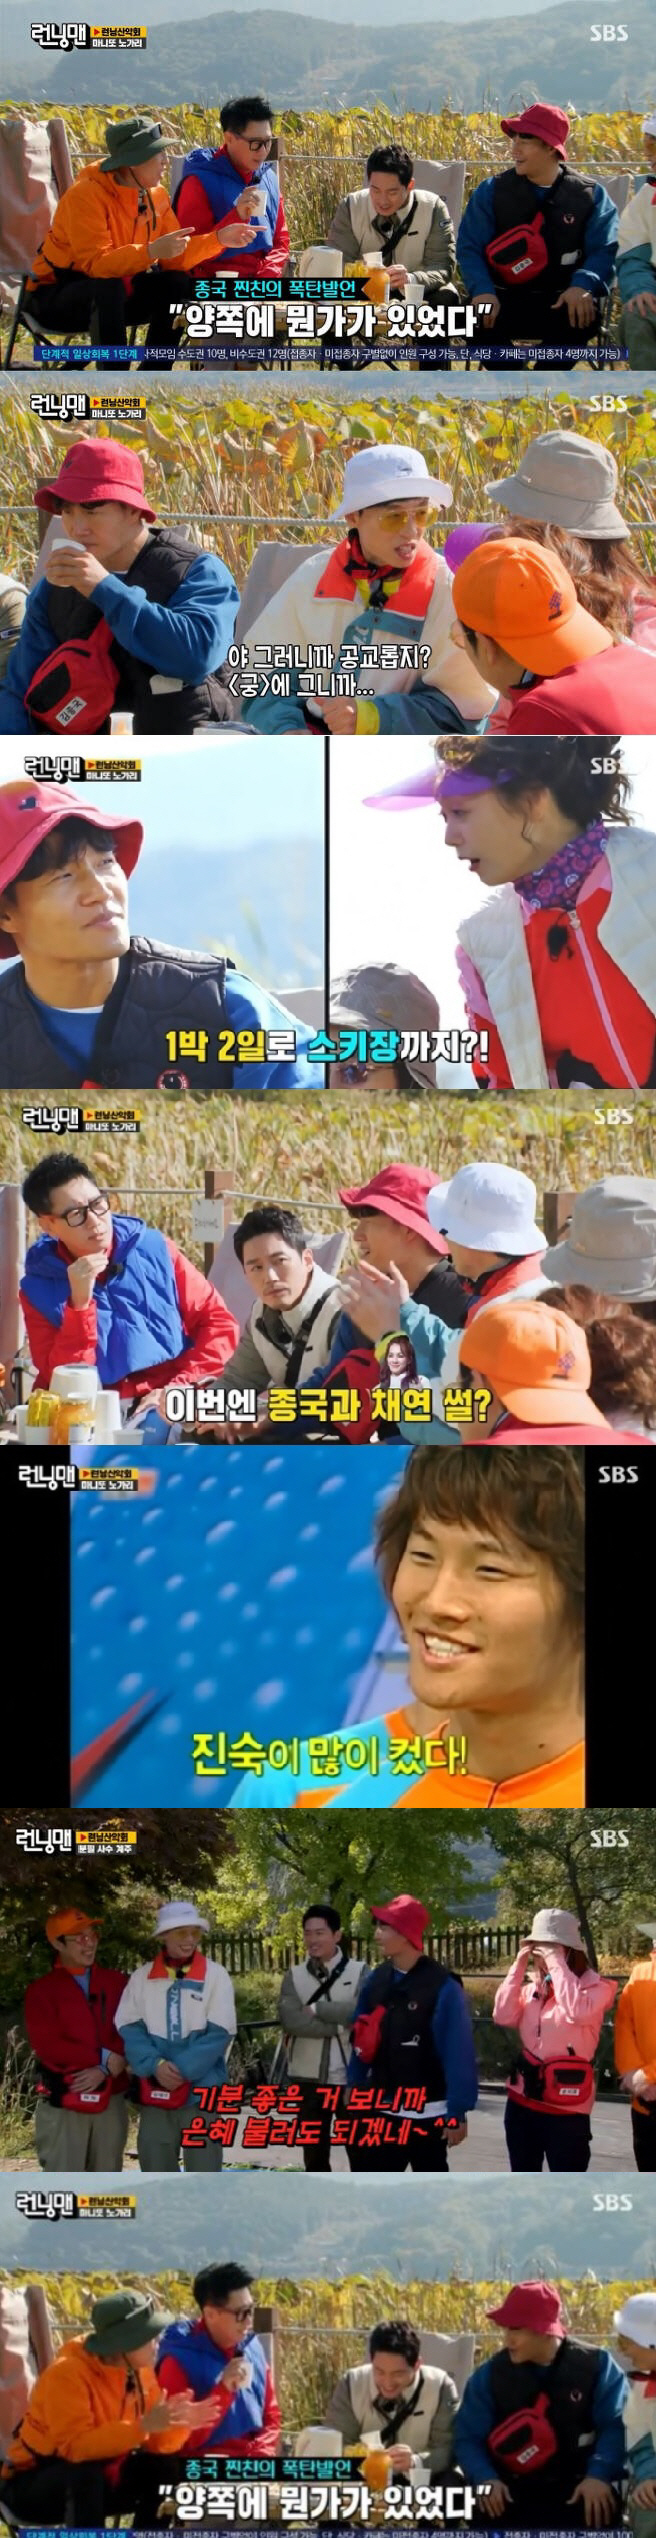 Loveline Rich Kim Jong-kook explains on love line with Chae Yeon following Yoon Eun-hyeThe SBS entertainment program Running Man was featured on the My Money-In-Running Mountain Club Race special feature on the 7th, and Kim Jong-kooks 20-year-old Tang Chin Jang Hyuk appeared as a guest.The running mountaineering race spent expenses every time members enjoyed the maple play course, but the members did not care about the expenses, but they bought snacks and even toured rickshaws.In the meantime, only Kim Jong-kook was a member who was worried about security.The members who decided to ride a rickshaw decided to set a pair.Yoo Jae-Suk, a loveline and immersion, mentioned the forced love lines of Kim Jong-kook and Song Ji-hyo, encouraging the two to ride rickshaws.When Ji Suk-jin asked Kim Jong-kooks best friend Jang Hyuk, Are you in favor or against it? Jang Hyuk sent a positive signal, If its a step to know what.Members who started to sit around and chat after riding a rickshaw. Jeon So-min told about the remake of the drama Gung, which Song Ji-hyo appeared in.Ji Hyo was in the gung - I was forgetting it, Yoo Jae-Suk said.Then, conscious of Kim Jong-kook and his long-time forced scandal counterpart, Yoon Eun-hye, the heroine of the palace, looked at Kim Jong-kook and Song Ji-hyo alternately and said, This is so coherent.Kim Jong-kook laughed and said, Do it properly.So, Jeon So-min teased that a piece of Kim Jong-kooks face was moved around in the poster of Palace, which both Yoon Eun-hye and Song Ji-hyo appeared.Subsequently, Ji Suk-jin mentioned another love line from Kim Jong-kook, with Ji Suk-jin saying, Tell me that.Chae Yeon liked you, he said. Chae Yeon met me in high school and Star Date. Yoo Jae-Suk said, There was a program called Star Date where stars and fans meet before, and at that time, Chae Yeon met Kim Jong-kook when he was a real person before his debut.When Jeon So-min asked if he had a drink, Kim Jong-kook said: I went to the ski resort for a night and two days, when Chae Yeon was a high school student.Of course nothing happened, he said, but unlike Kim Jong-kooks explanation, the members cheered at the words one night and two days.Kim Jong-kook and Chae Yeon, who met on Star Date, were later reunited on X-Men after Chae Yeon made her singer debut. Haha said, Chae Yeon Sister said, Do you remember me brother?My brother opened his eyes like this and said, How are you? and followed Kim Jong-kook with a feeling of feeling.Kim Jong-kook said, Its not that, but I said, How are you?So the members said, So it was a triangle with Kim Jong-kook, Yoon Eun-hye, and Chae Yeon. Jang Hyuk said, It was not a triangle relationship, but there was something on both sides.I need to think about drinking water like this. 